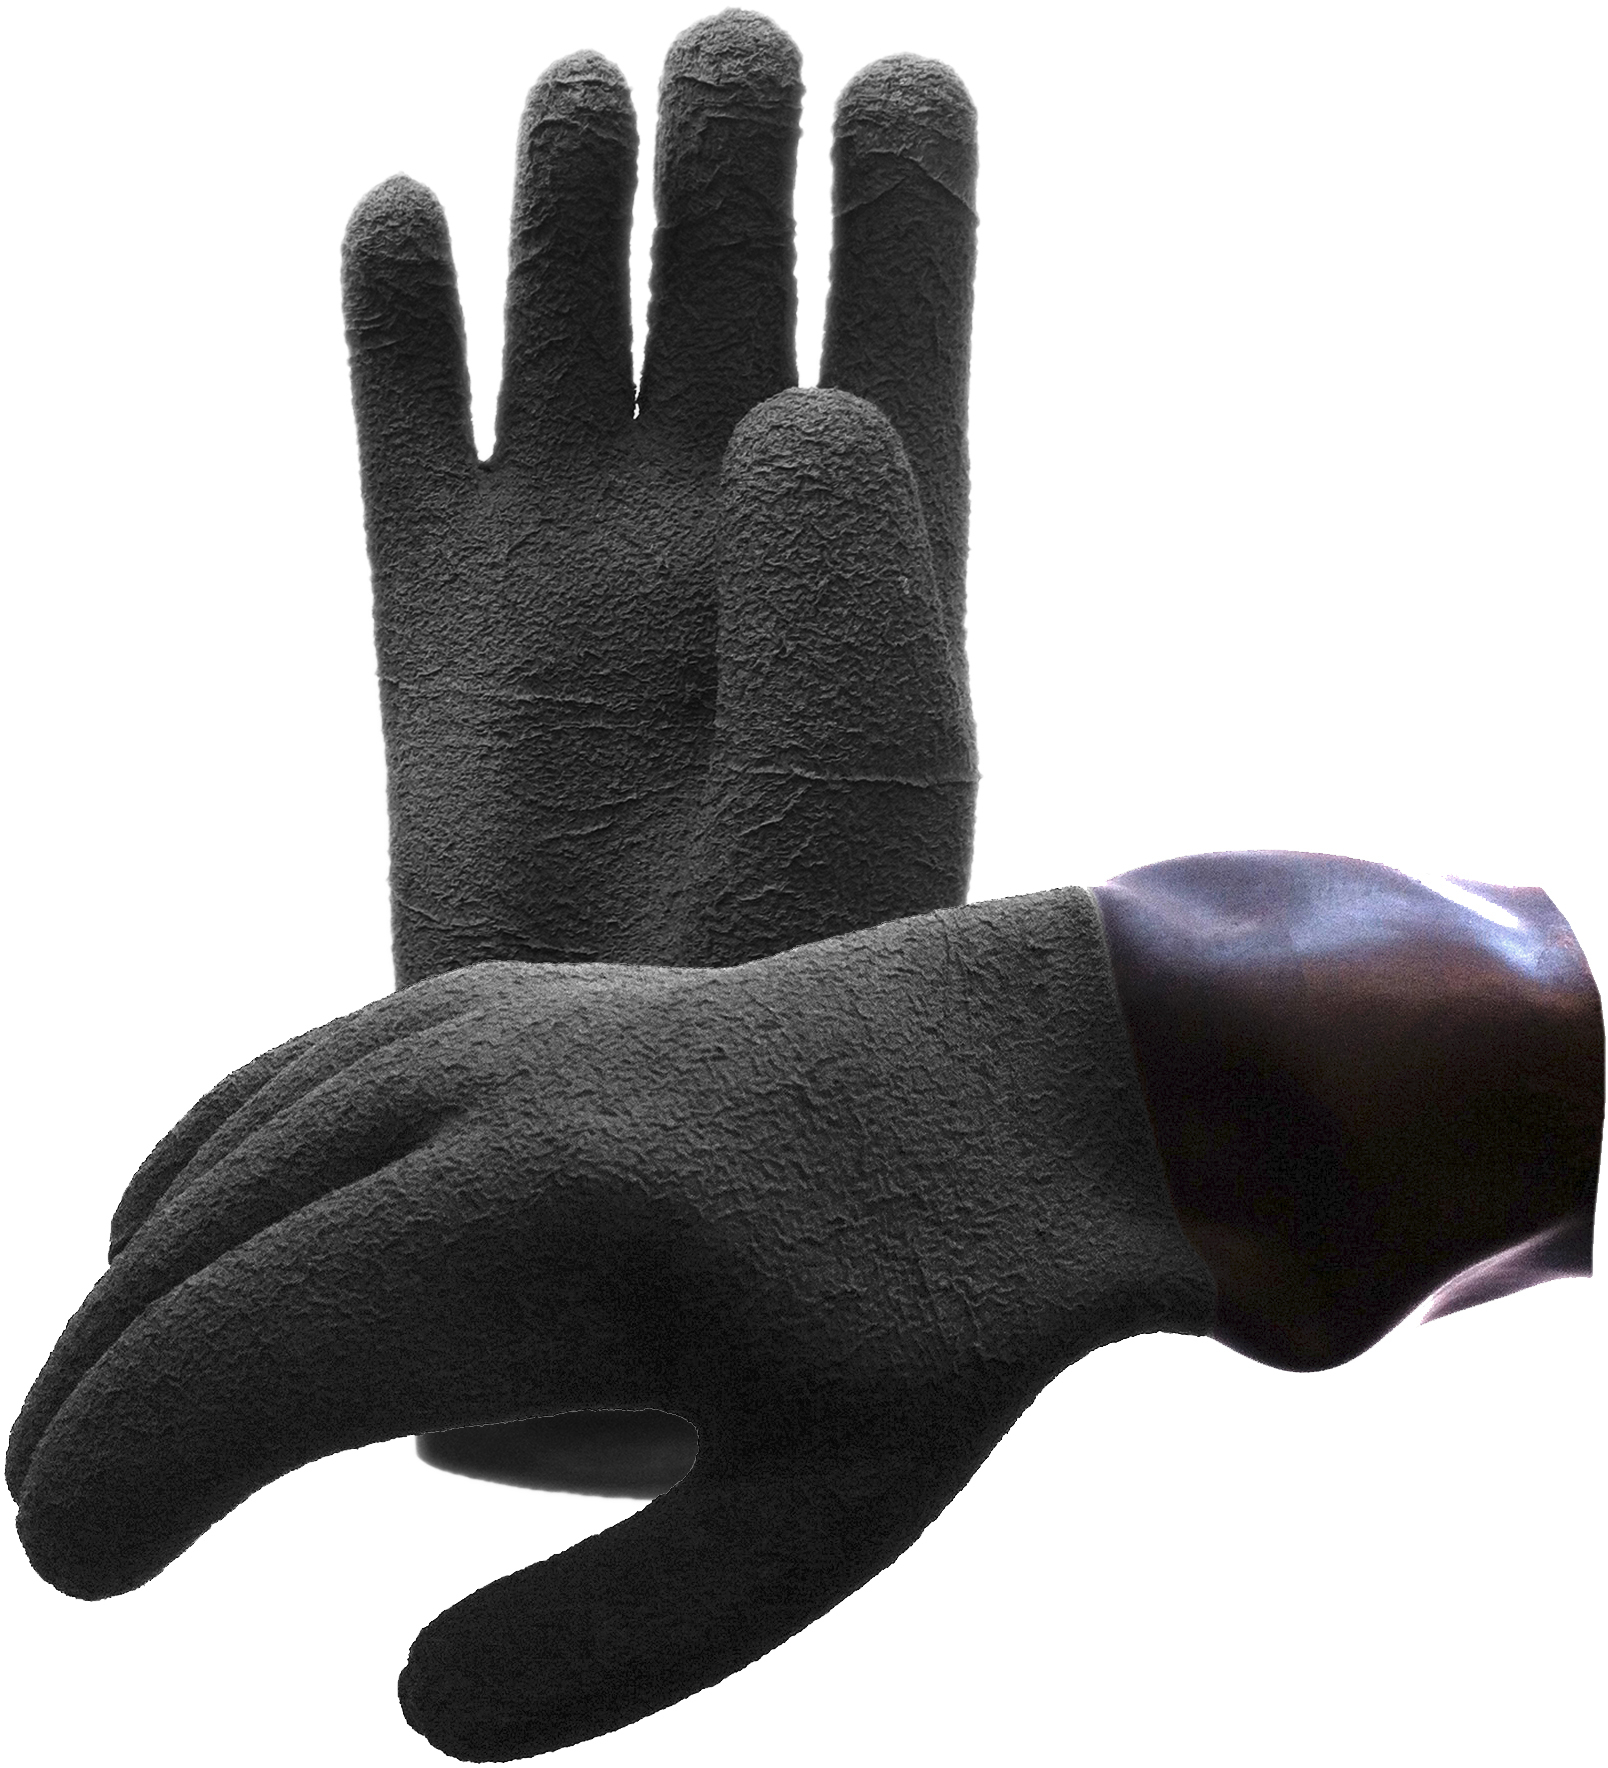 Waterproof Dry Gloves with Liner For ISS Suits